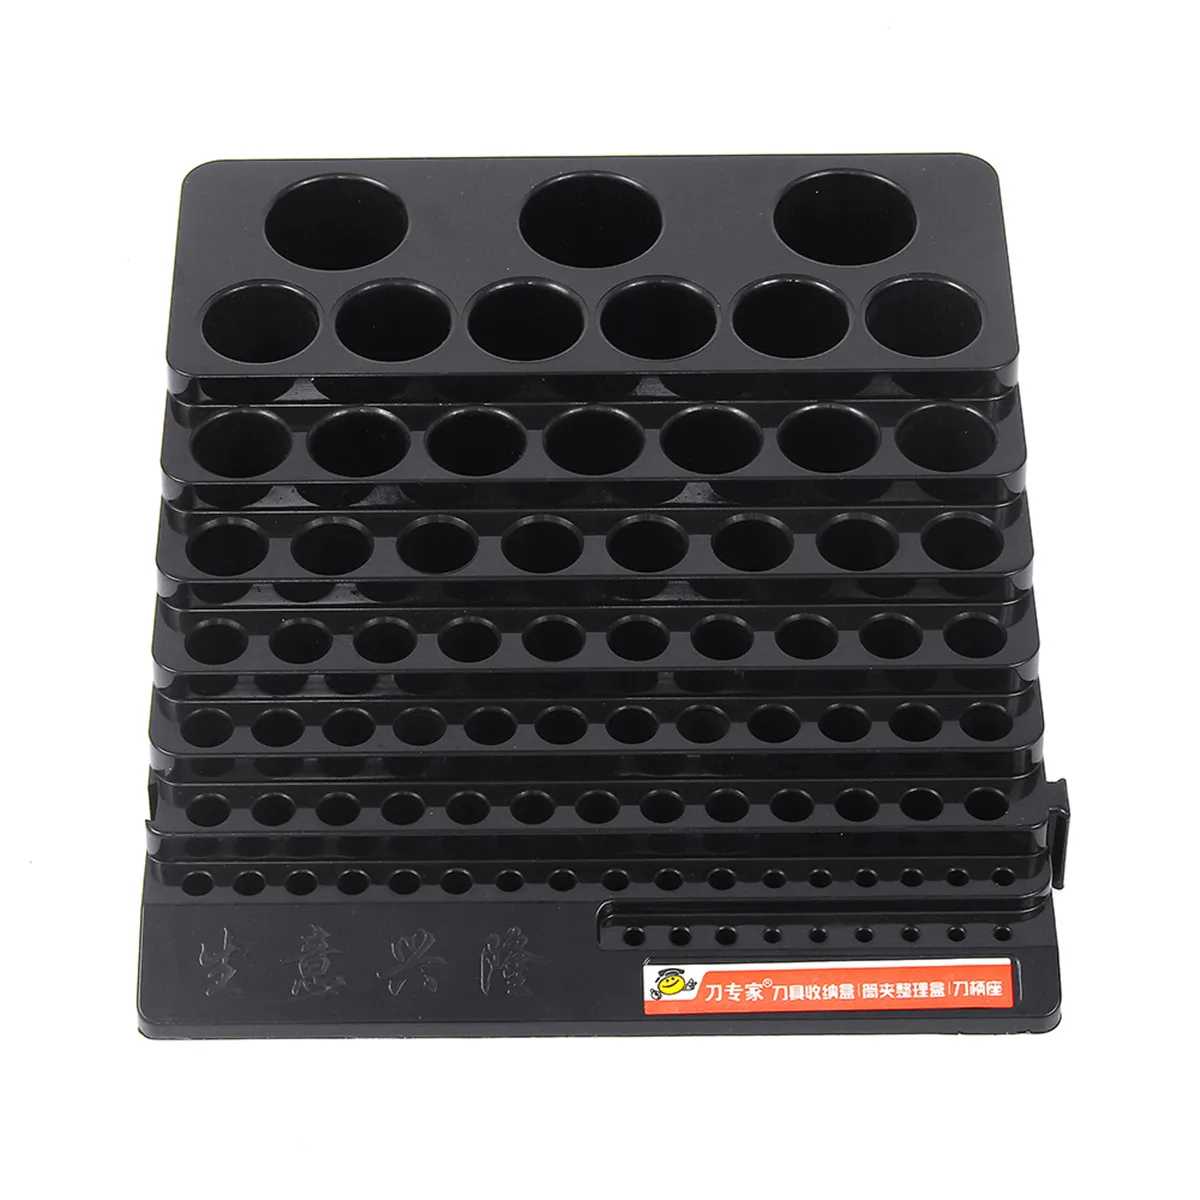 

85 Hole Multifunction Drill Bit Holder Tool Box Storage Reamer Milling Cutter Plastic Desktop Portable Accessories Thick Rack